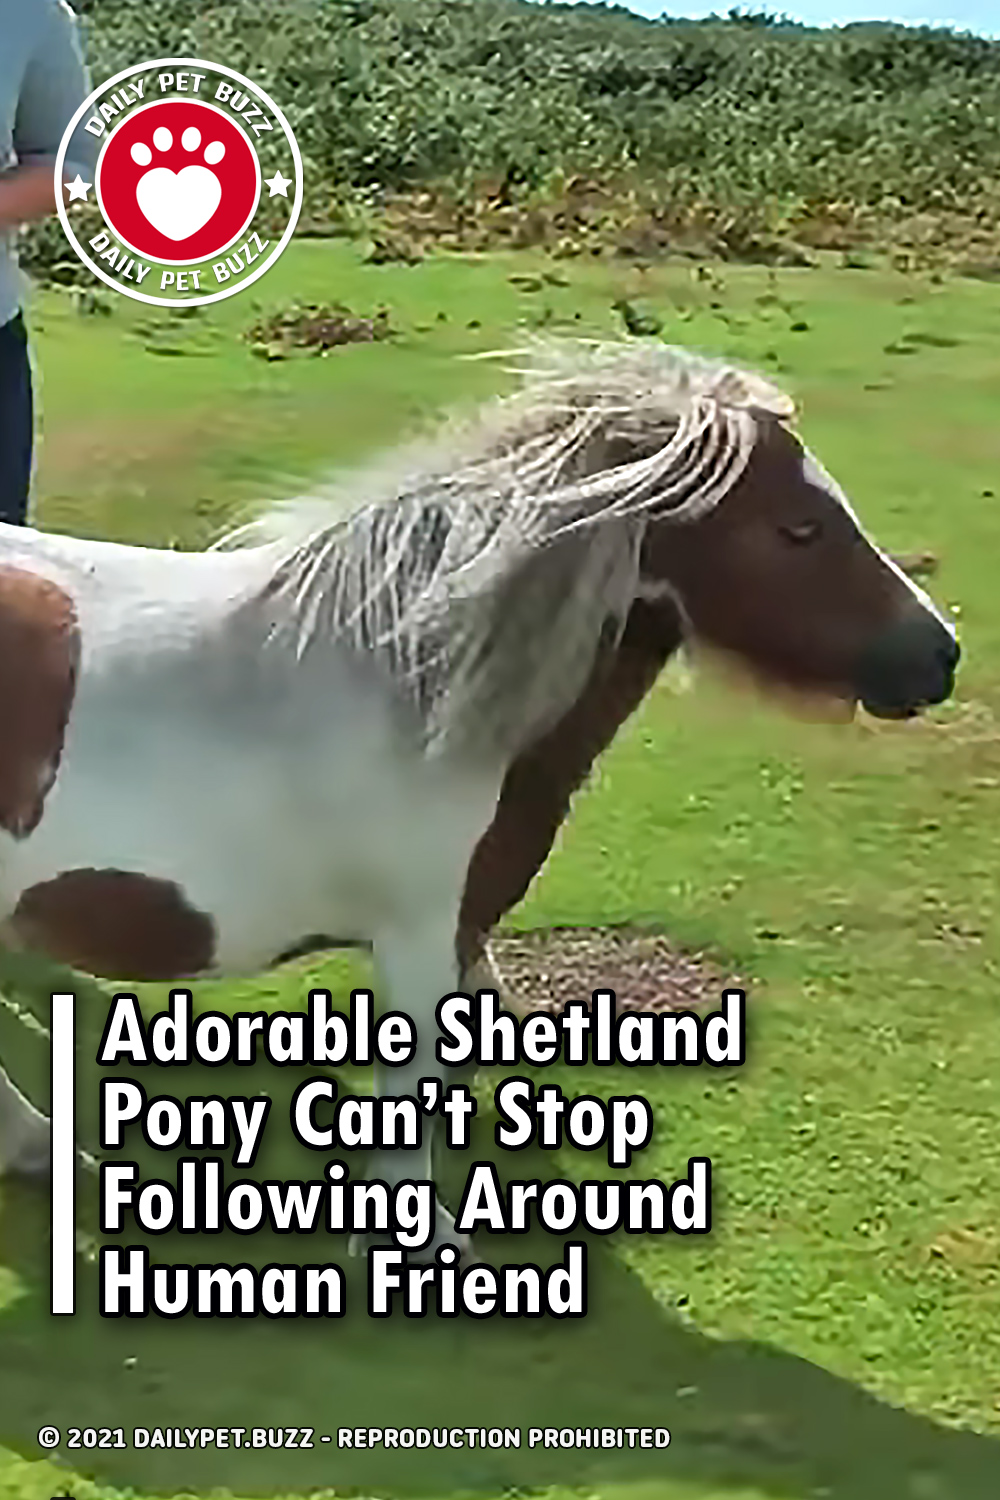 Adorable Shetland Pony Can’t Stop Following Around Human Friend